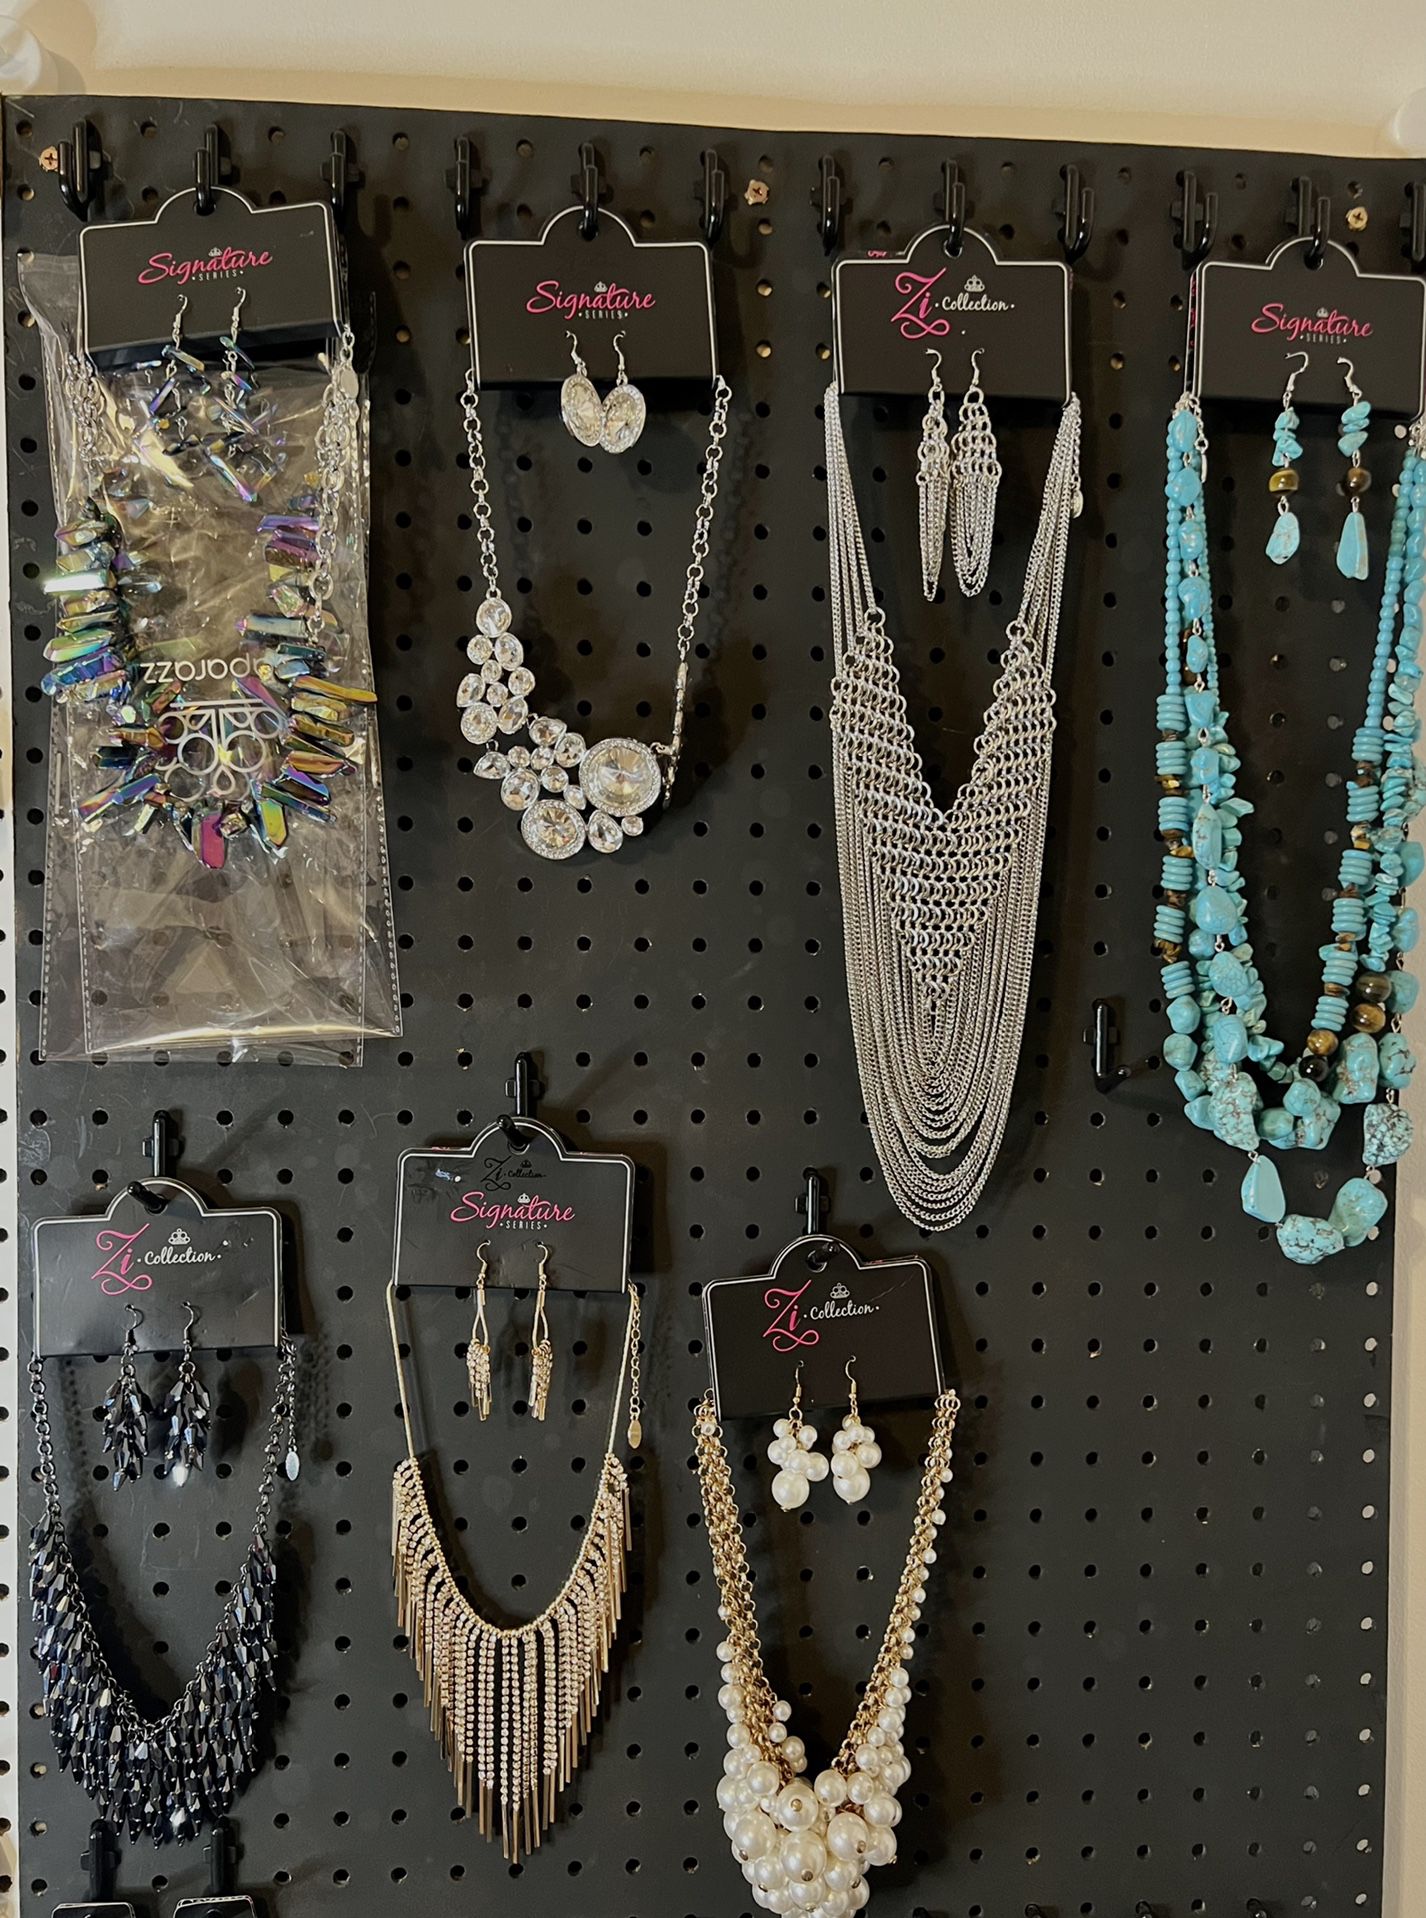 Zi collection  jewelry  $15-20 